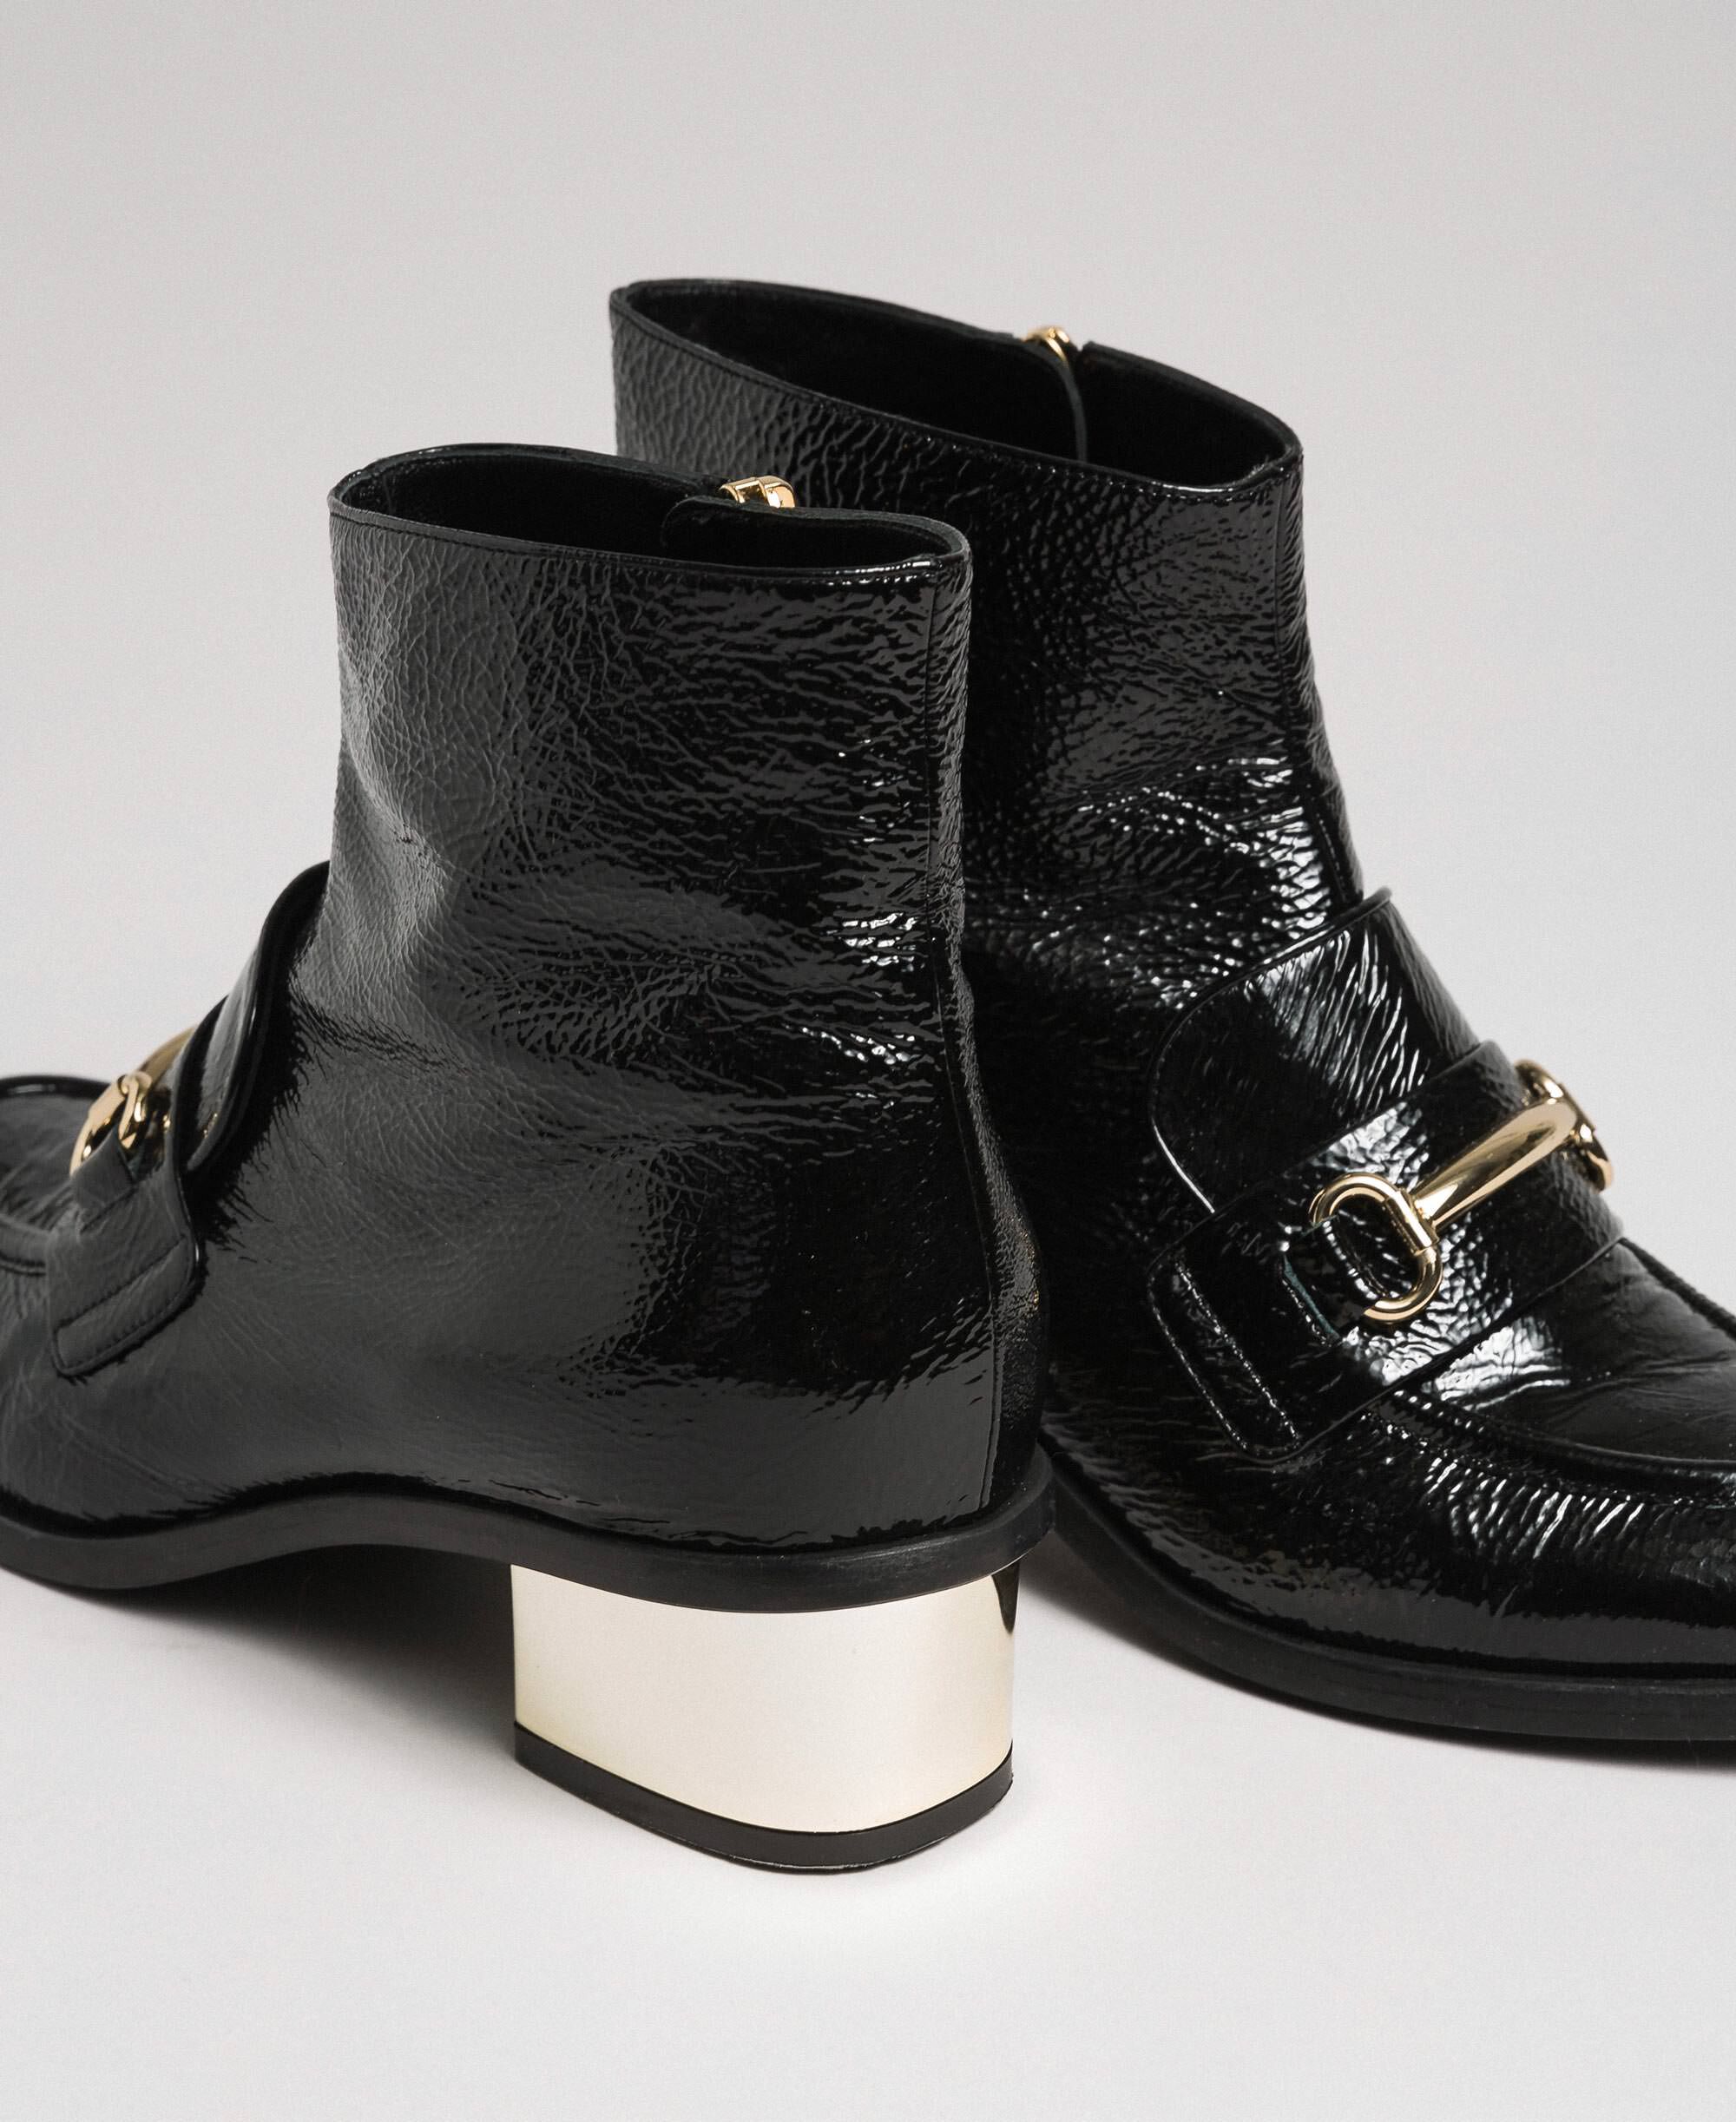 patent leather boots black